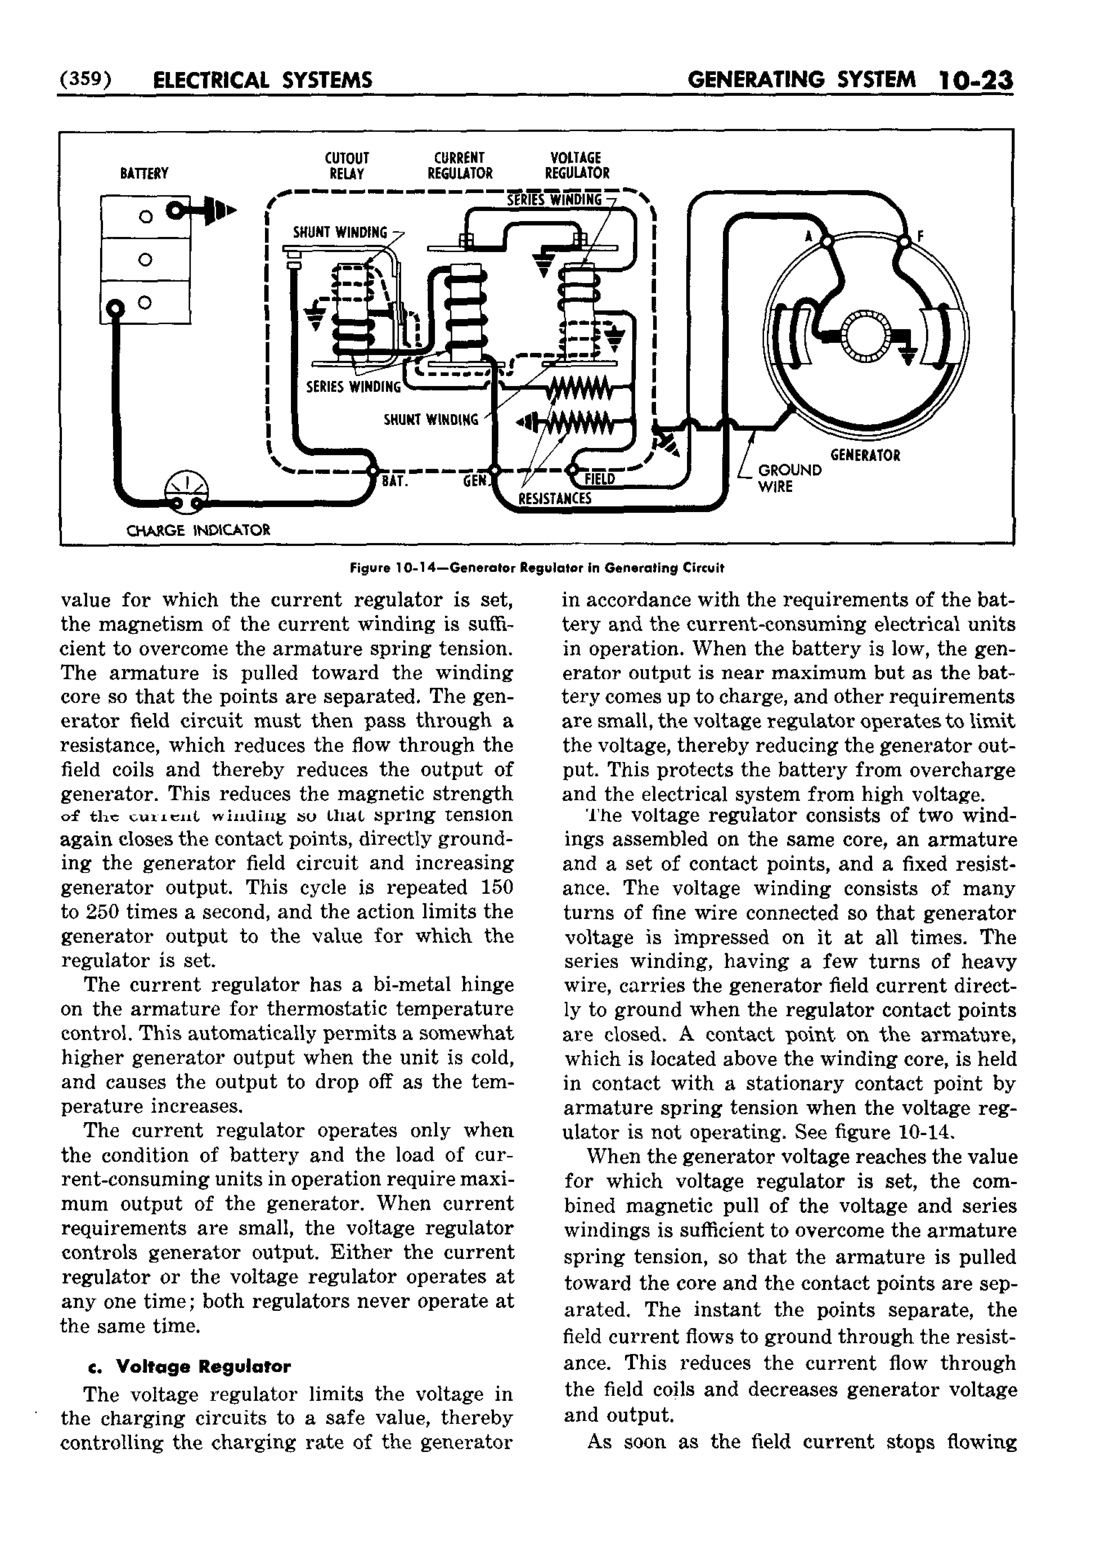 n_11 1952 Buick Shop Manual - Electrical Systems-023-023.jpg